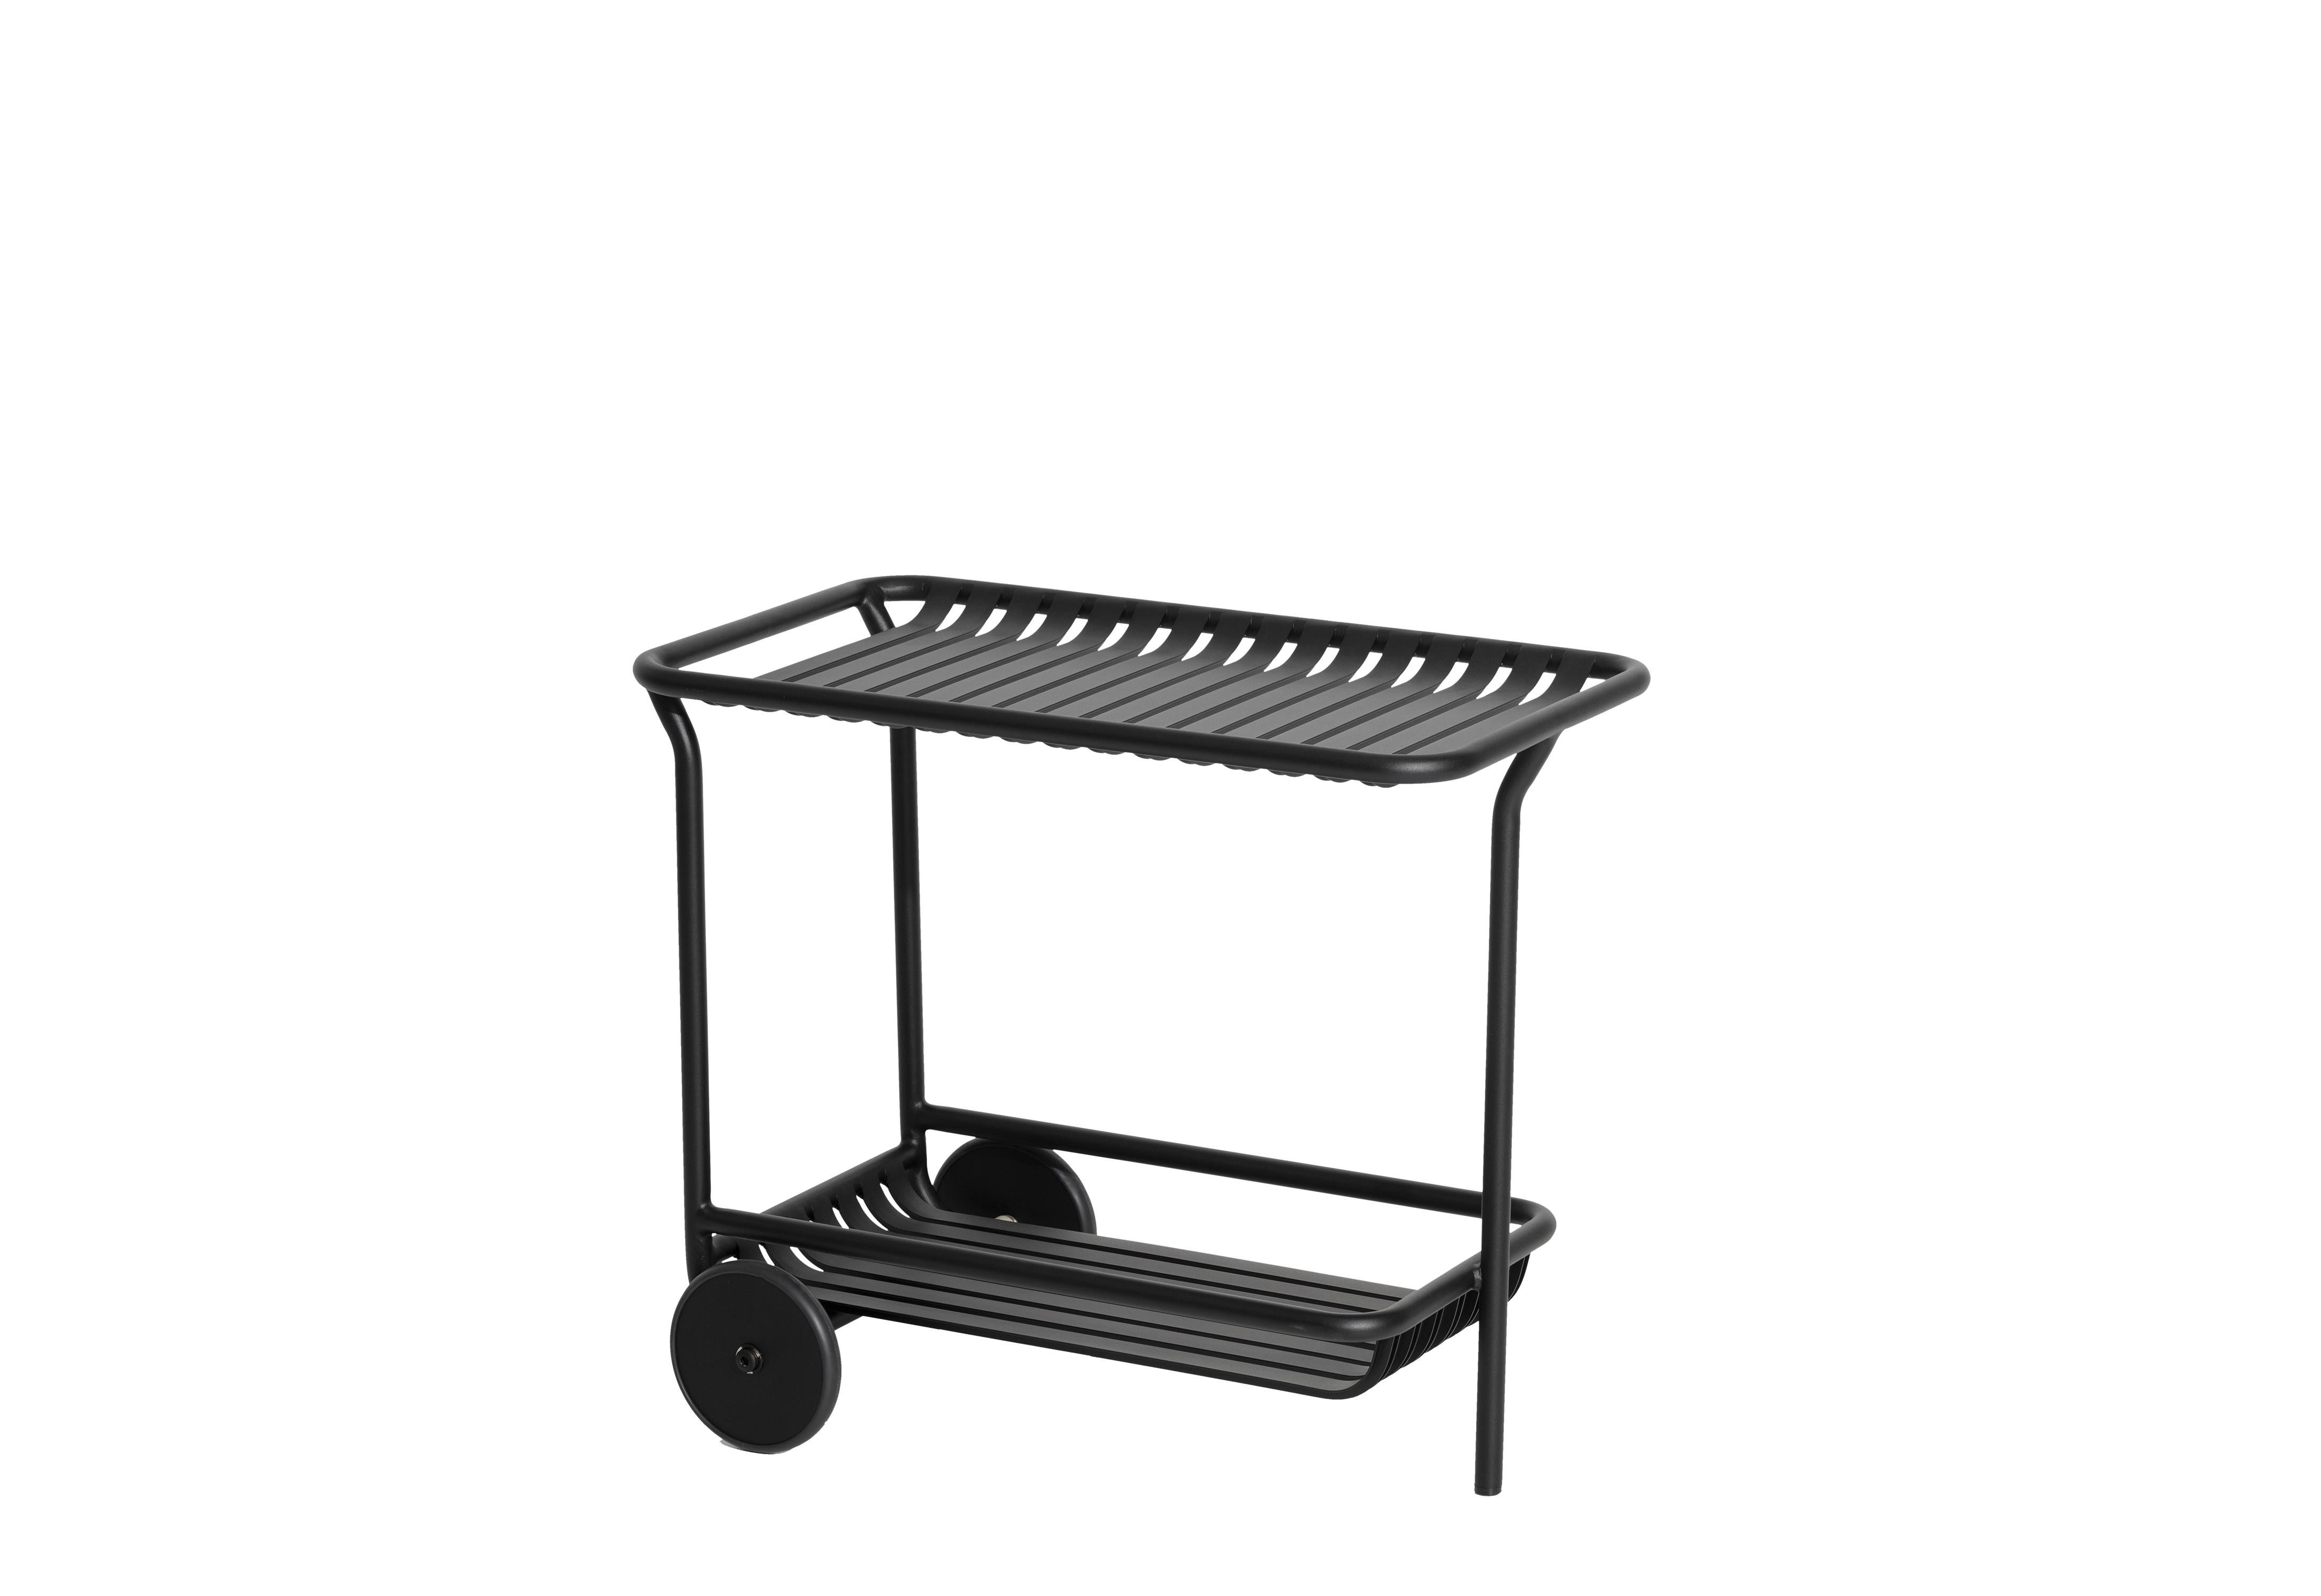 Petite Friture Week-End Trolley in Black Aluminium by Studio BrichetZiegler, 2017

The week-end collection is a full range of outdoor furniture, in aluminium grained epoxy paint, matt finish, that includes 18 functions and 8 colours for the retail